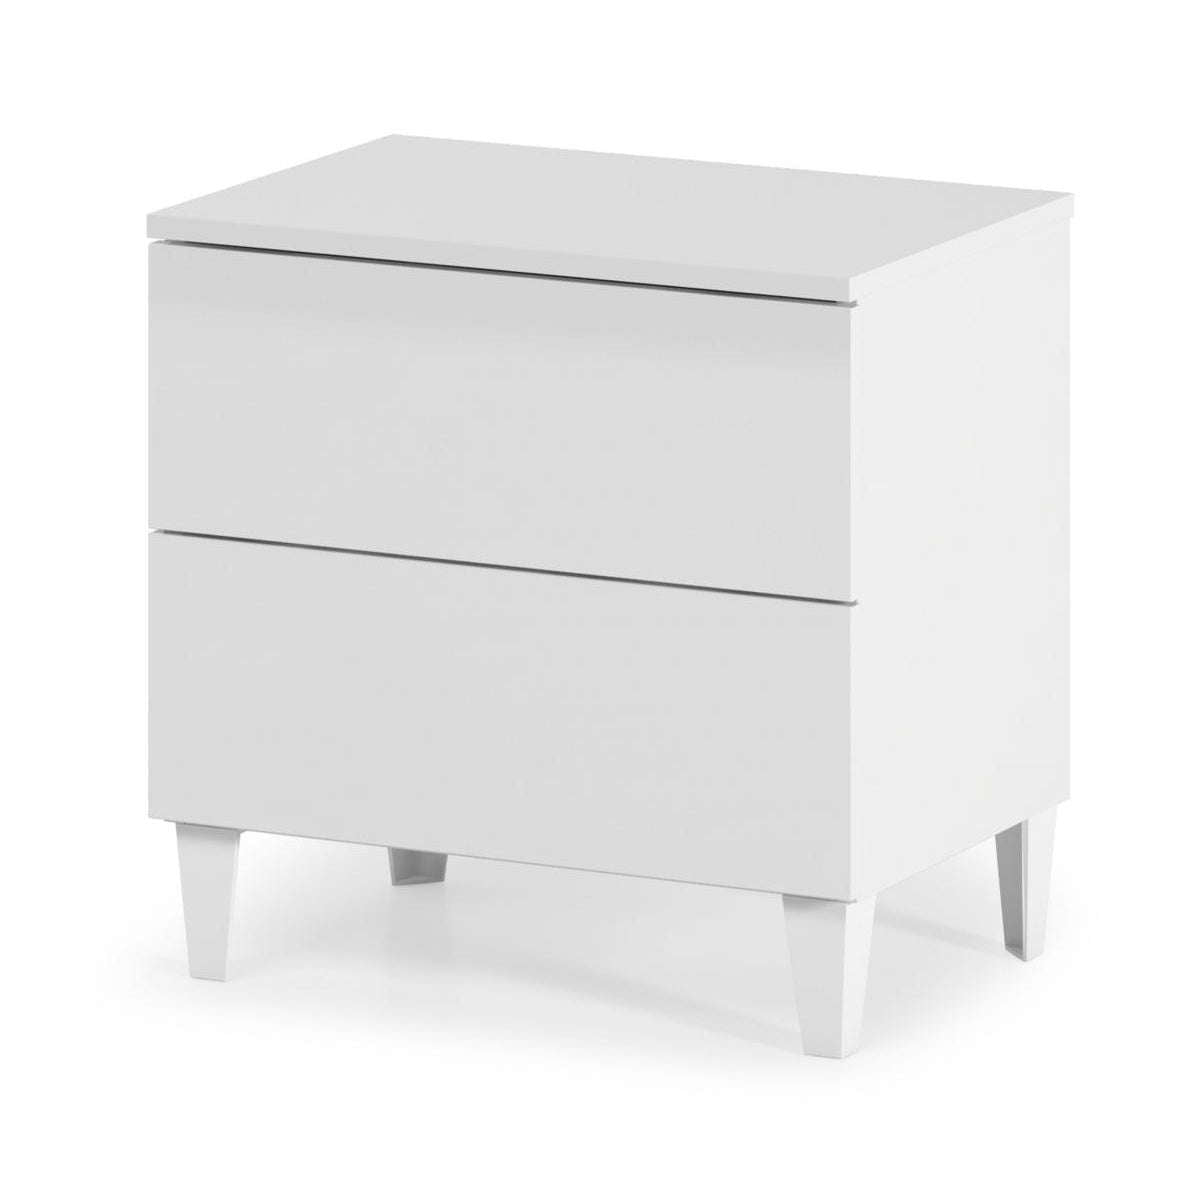 Ashpinoke:Arctic Chest 2 Drawer White 007832BO,Chests and Drawers,Heartlands Furniture